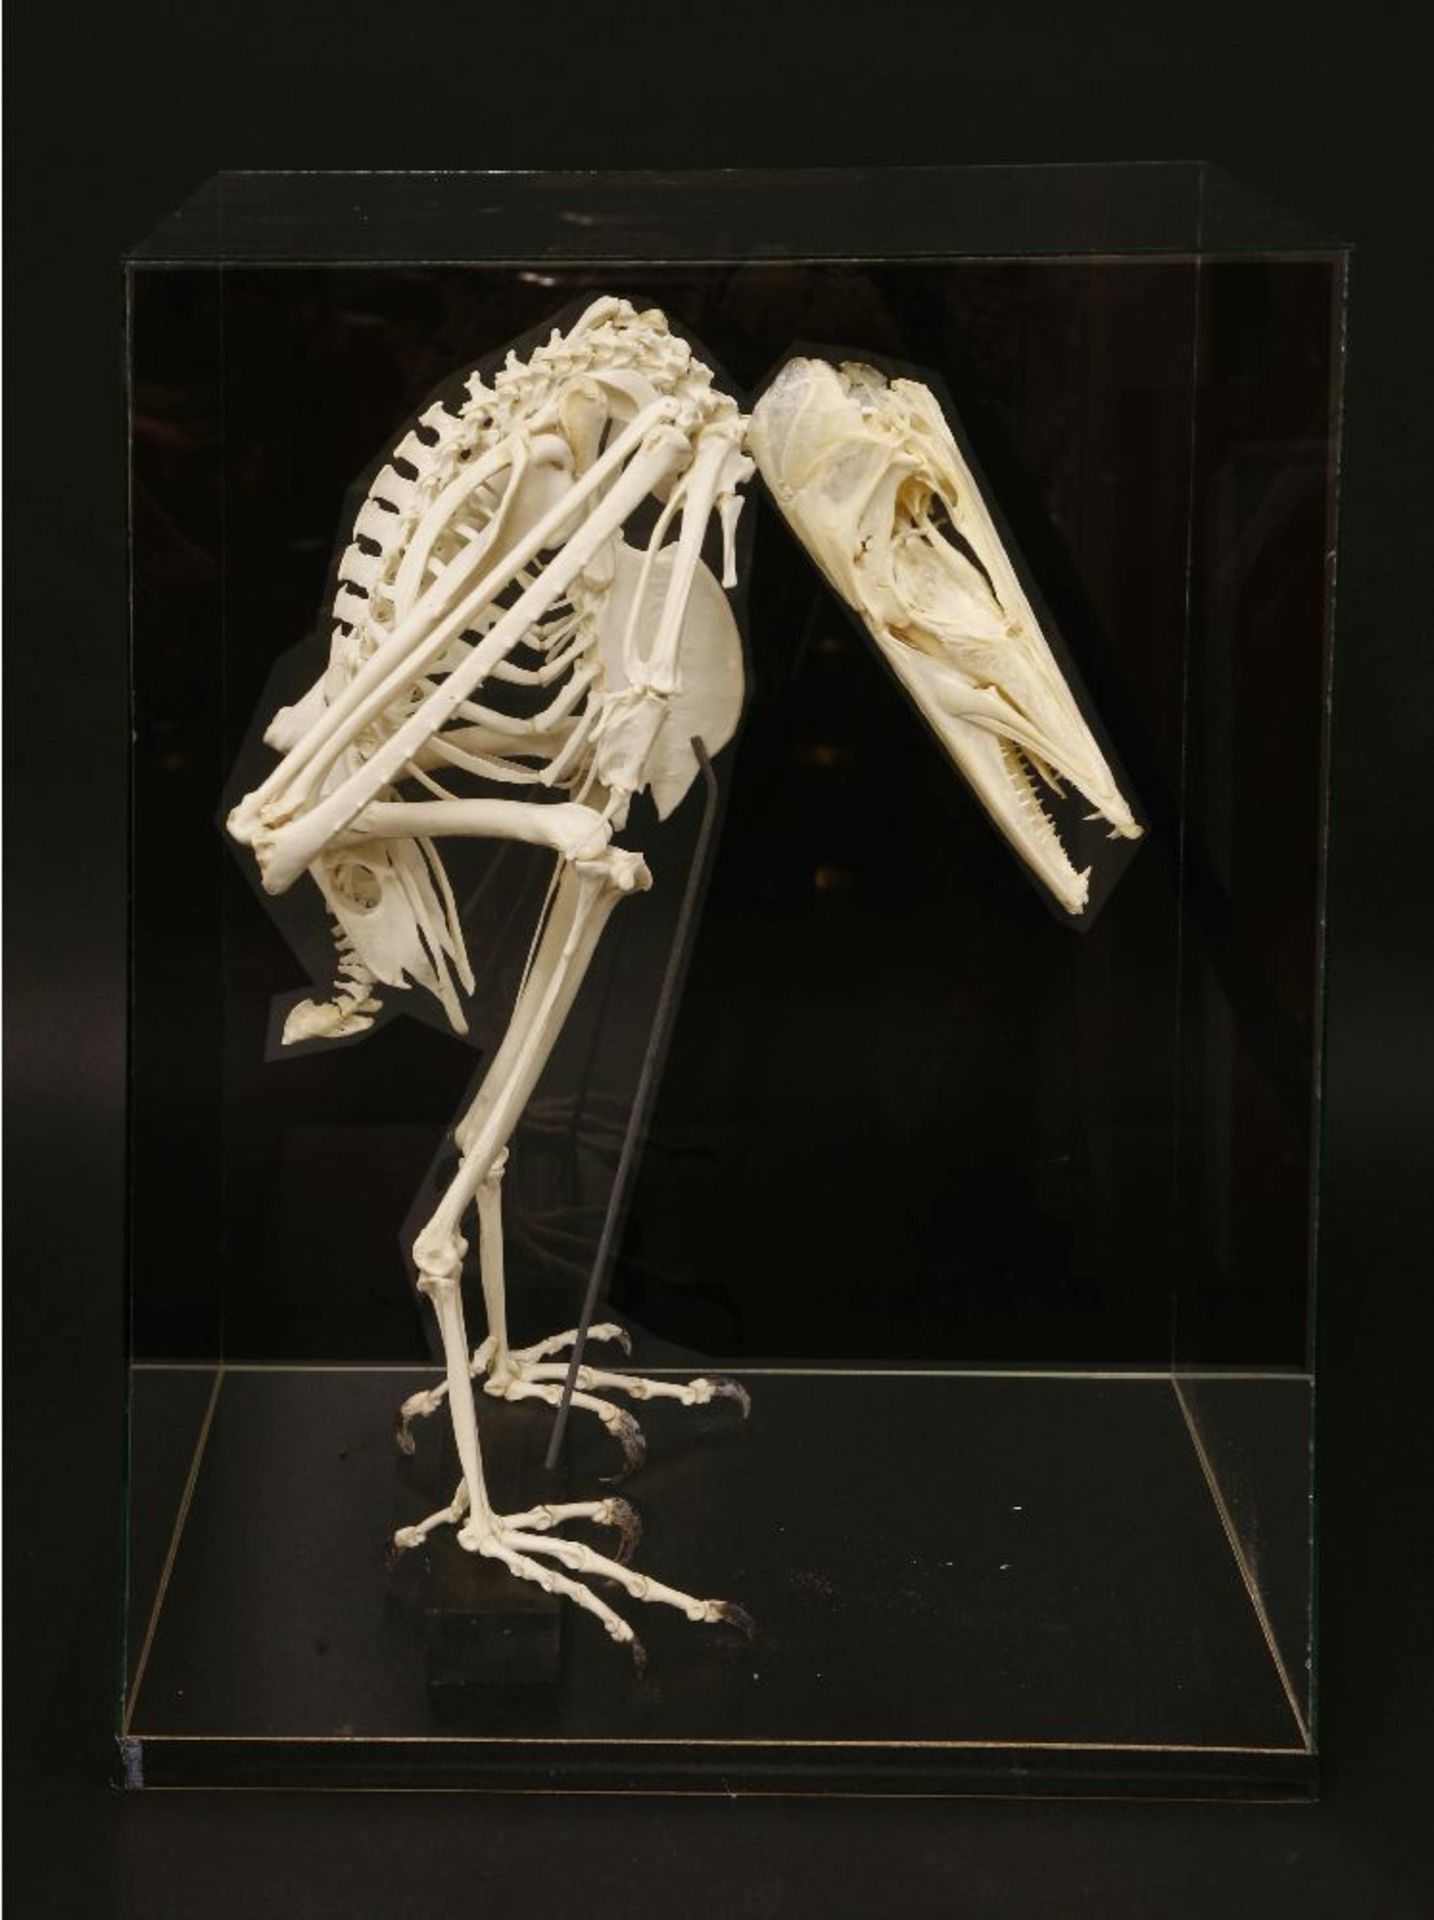 'THE ACCOUNTANT',late 20th century, a whimsical 'Accountant' skeleton, formed from various animal